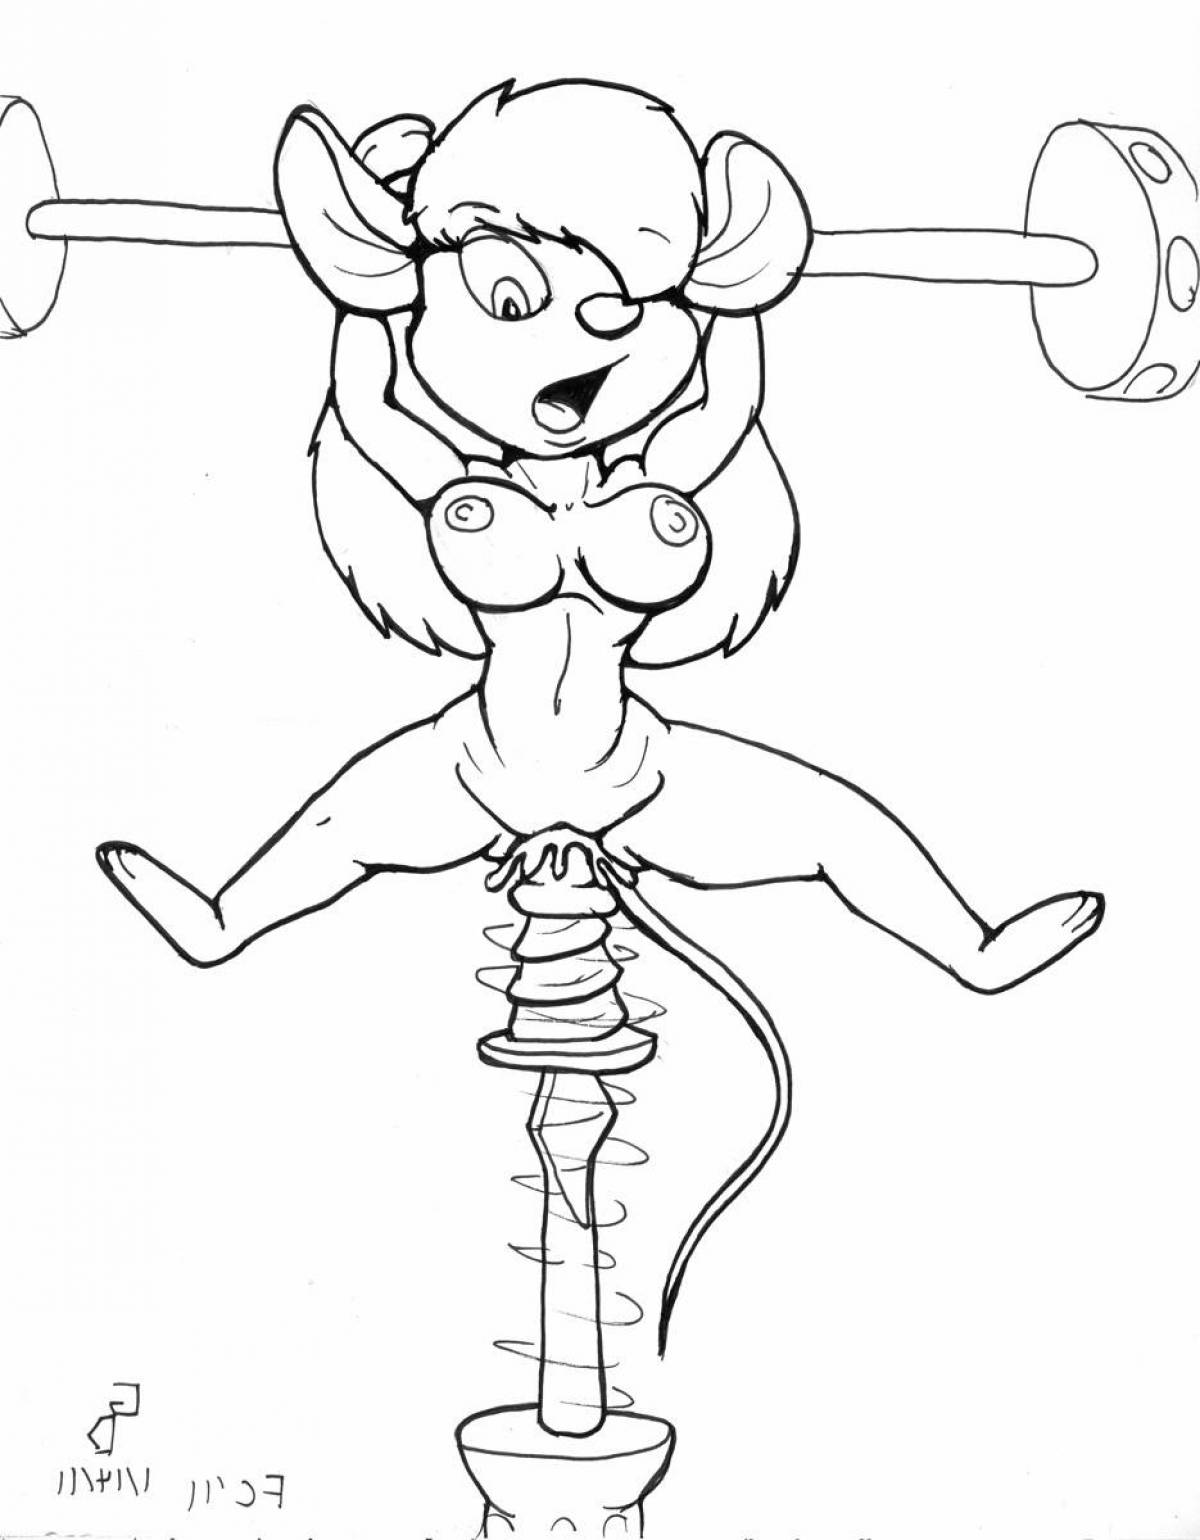 Obscene porn coloring pages